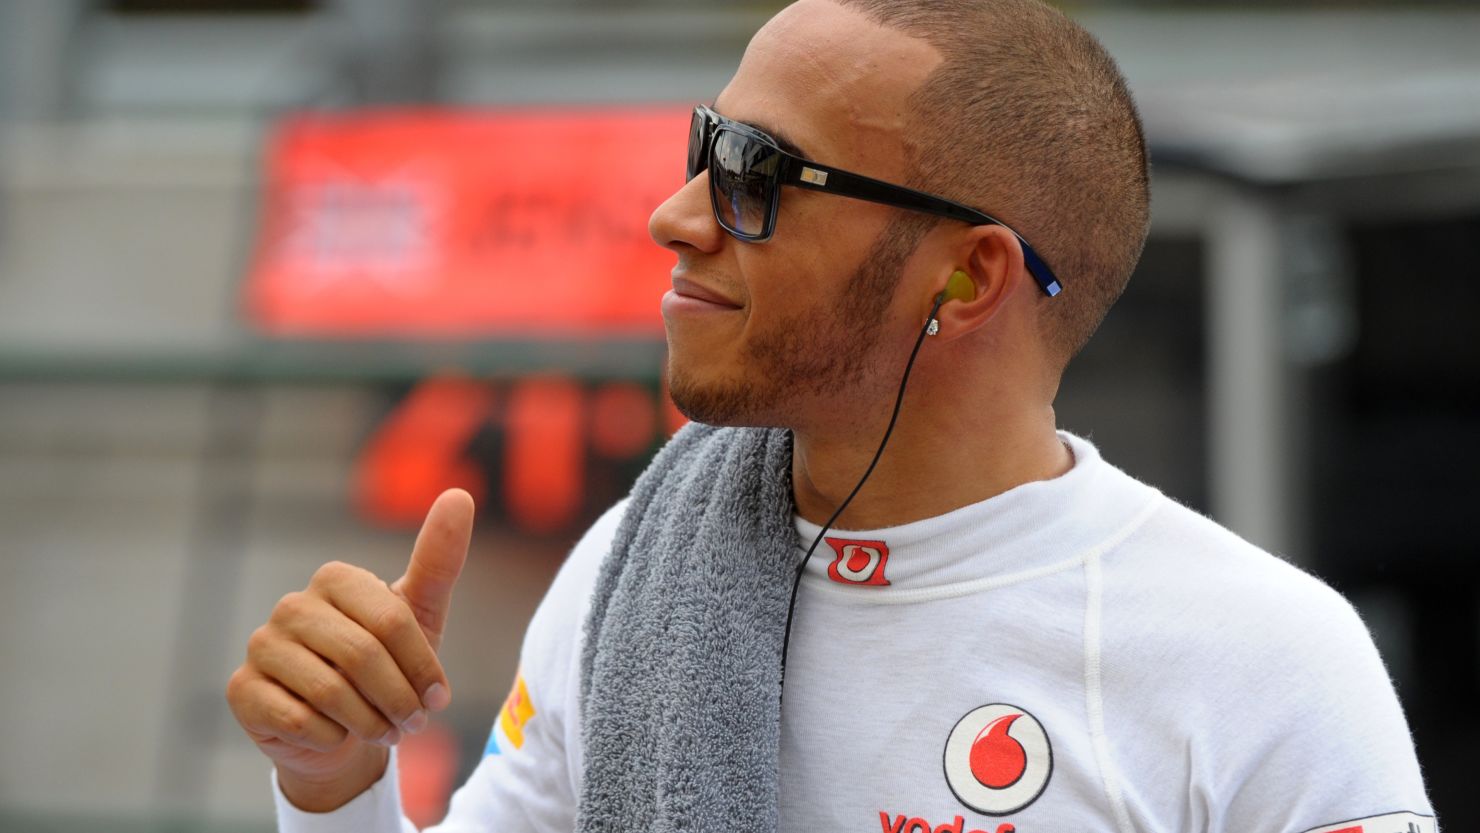 Lewis Hamilton is in confident mood after knocking the Red Bulls off pole in Abu Dhabi.